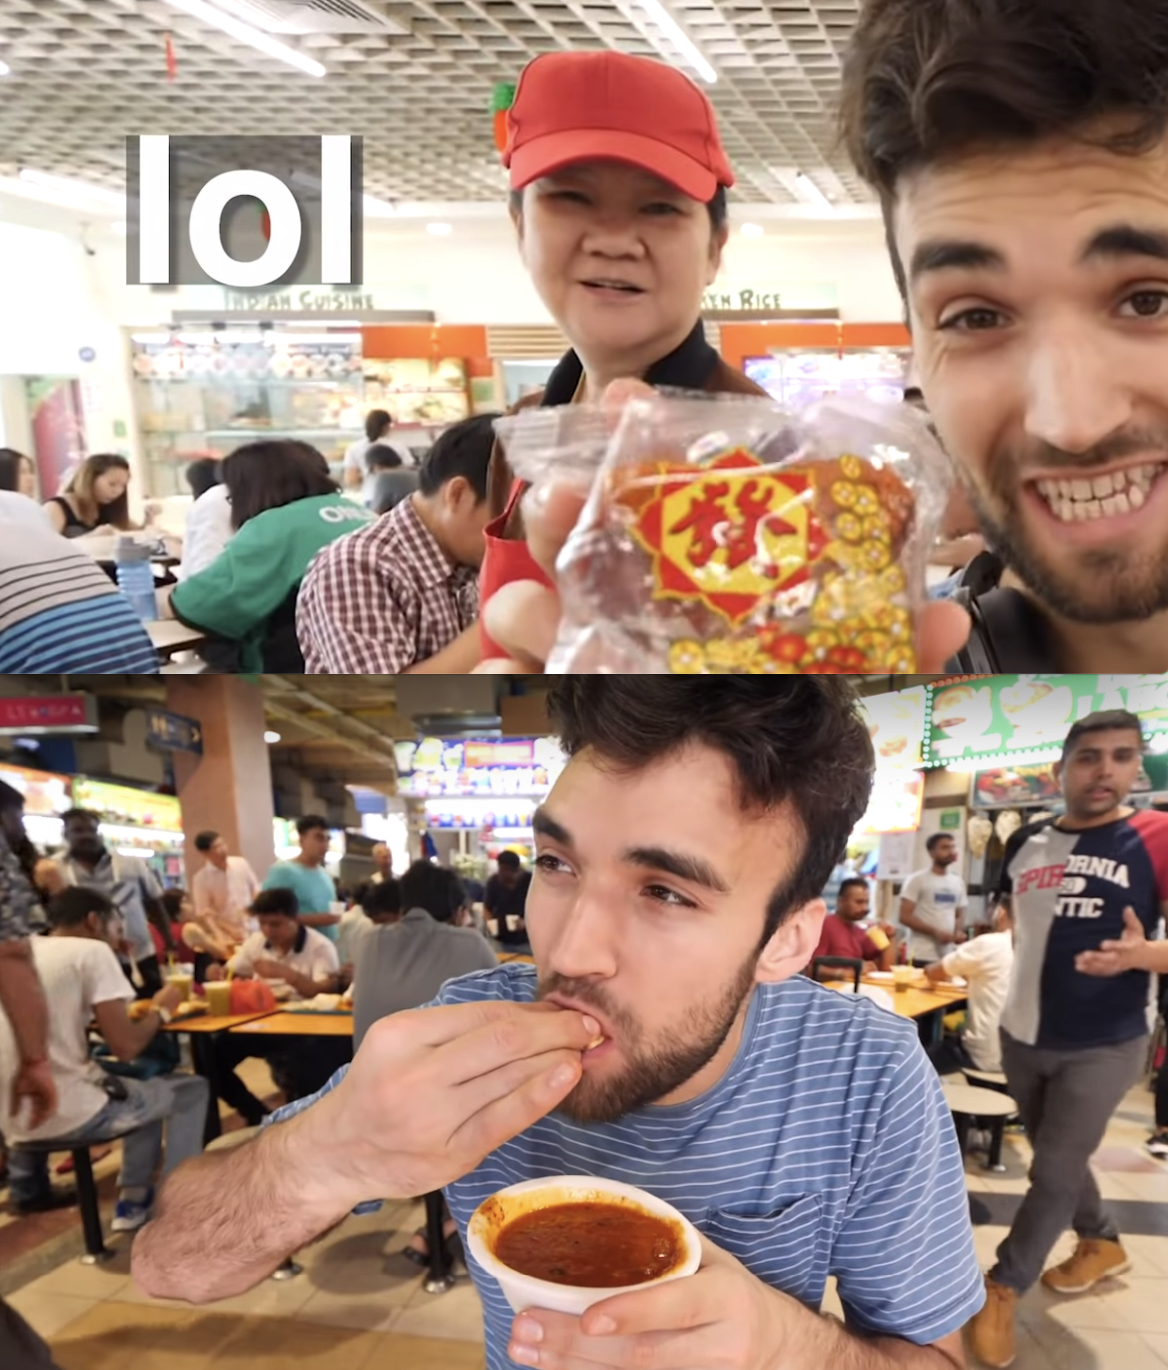 American YouTuber looking for S$1 meals in S’pore eats cake used in offerings